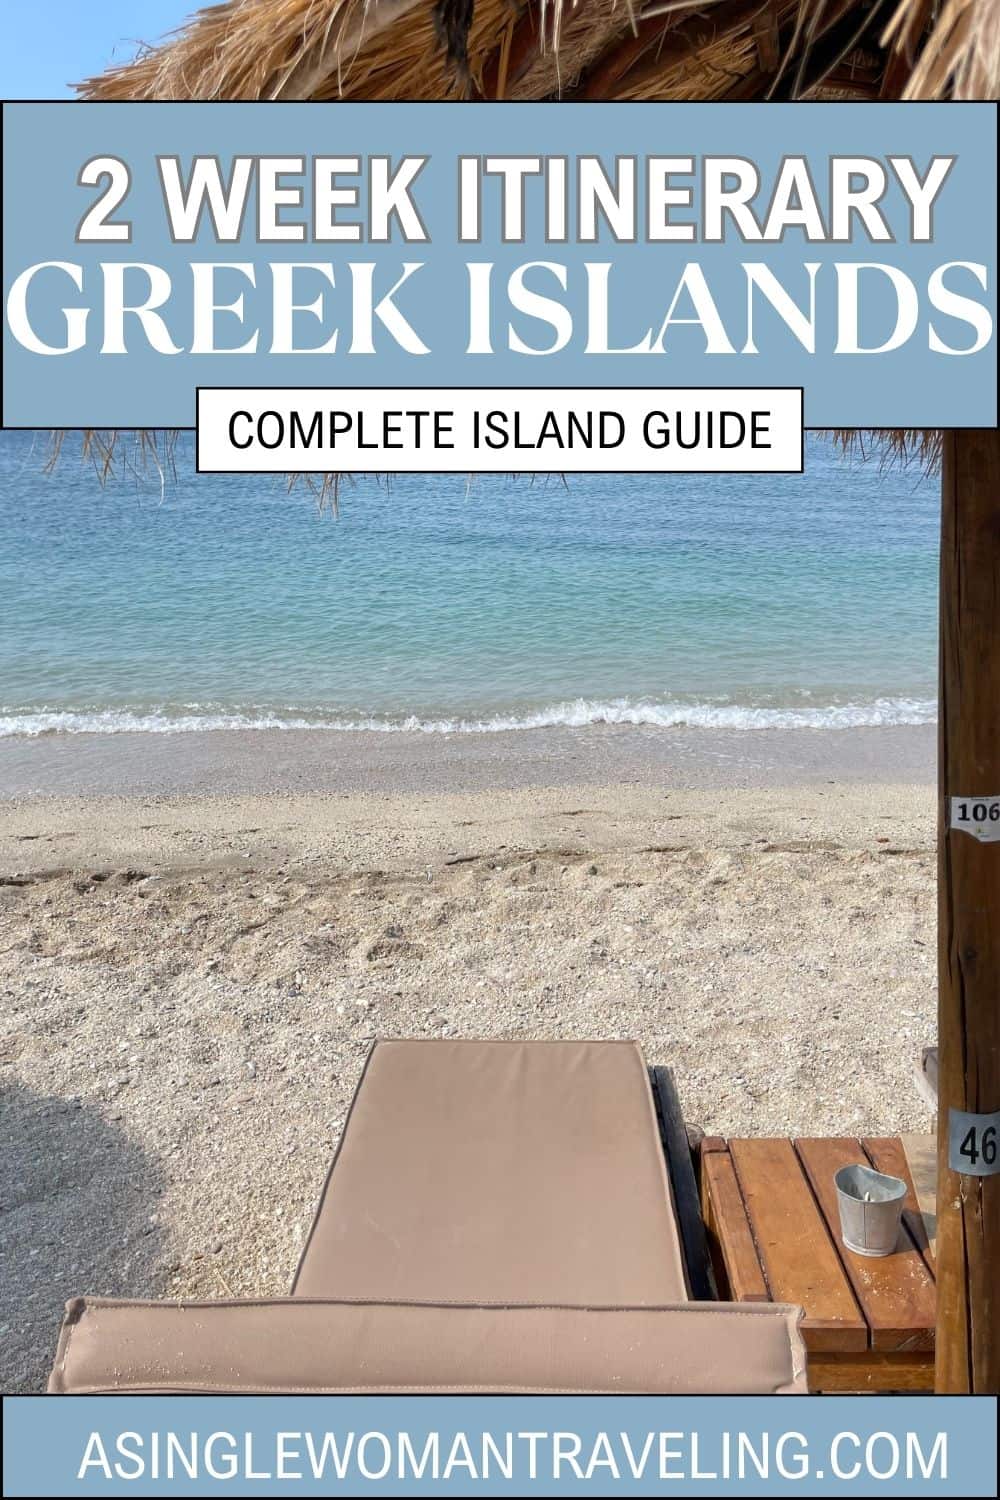 Serene beach scene with a thatched umbrella and a single sunbed facing the clear blue waters of the Aegean Sea, symbolizing the relaxed pace of a complete two-week island guide for the Greek Islands.